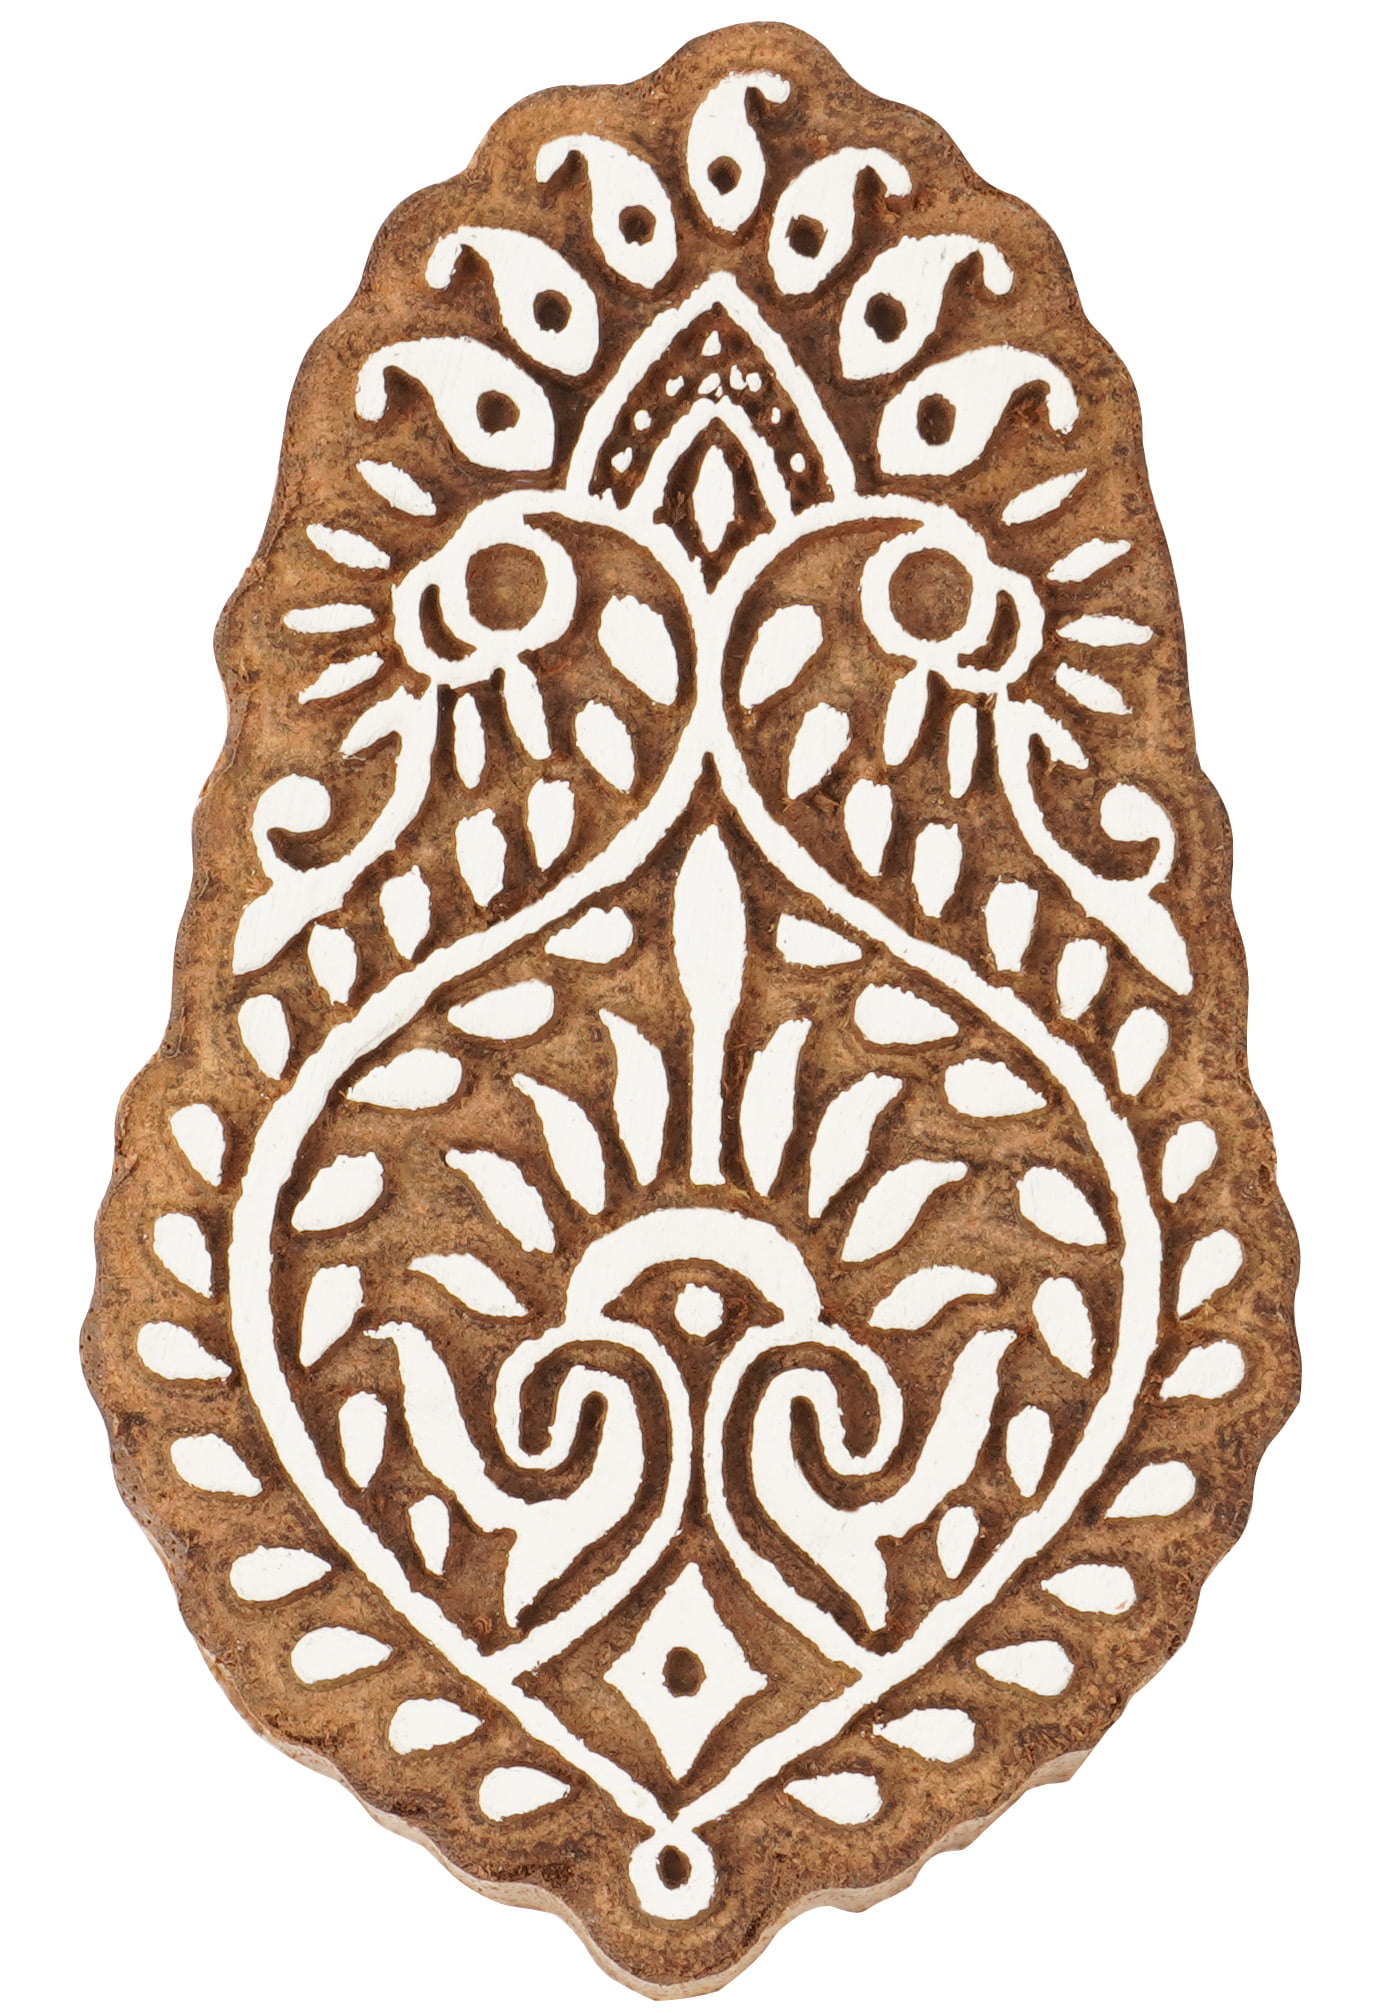 Clay Teaching. Decorative Motif Wood Stamps for Scrapbooking Painting Block Printing on Fabric Paper Card Making Hashcart Wood Block Printing Stamps Saree Border School Supplies for Kids 